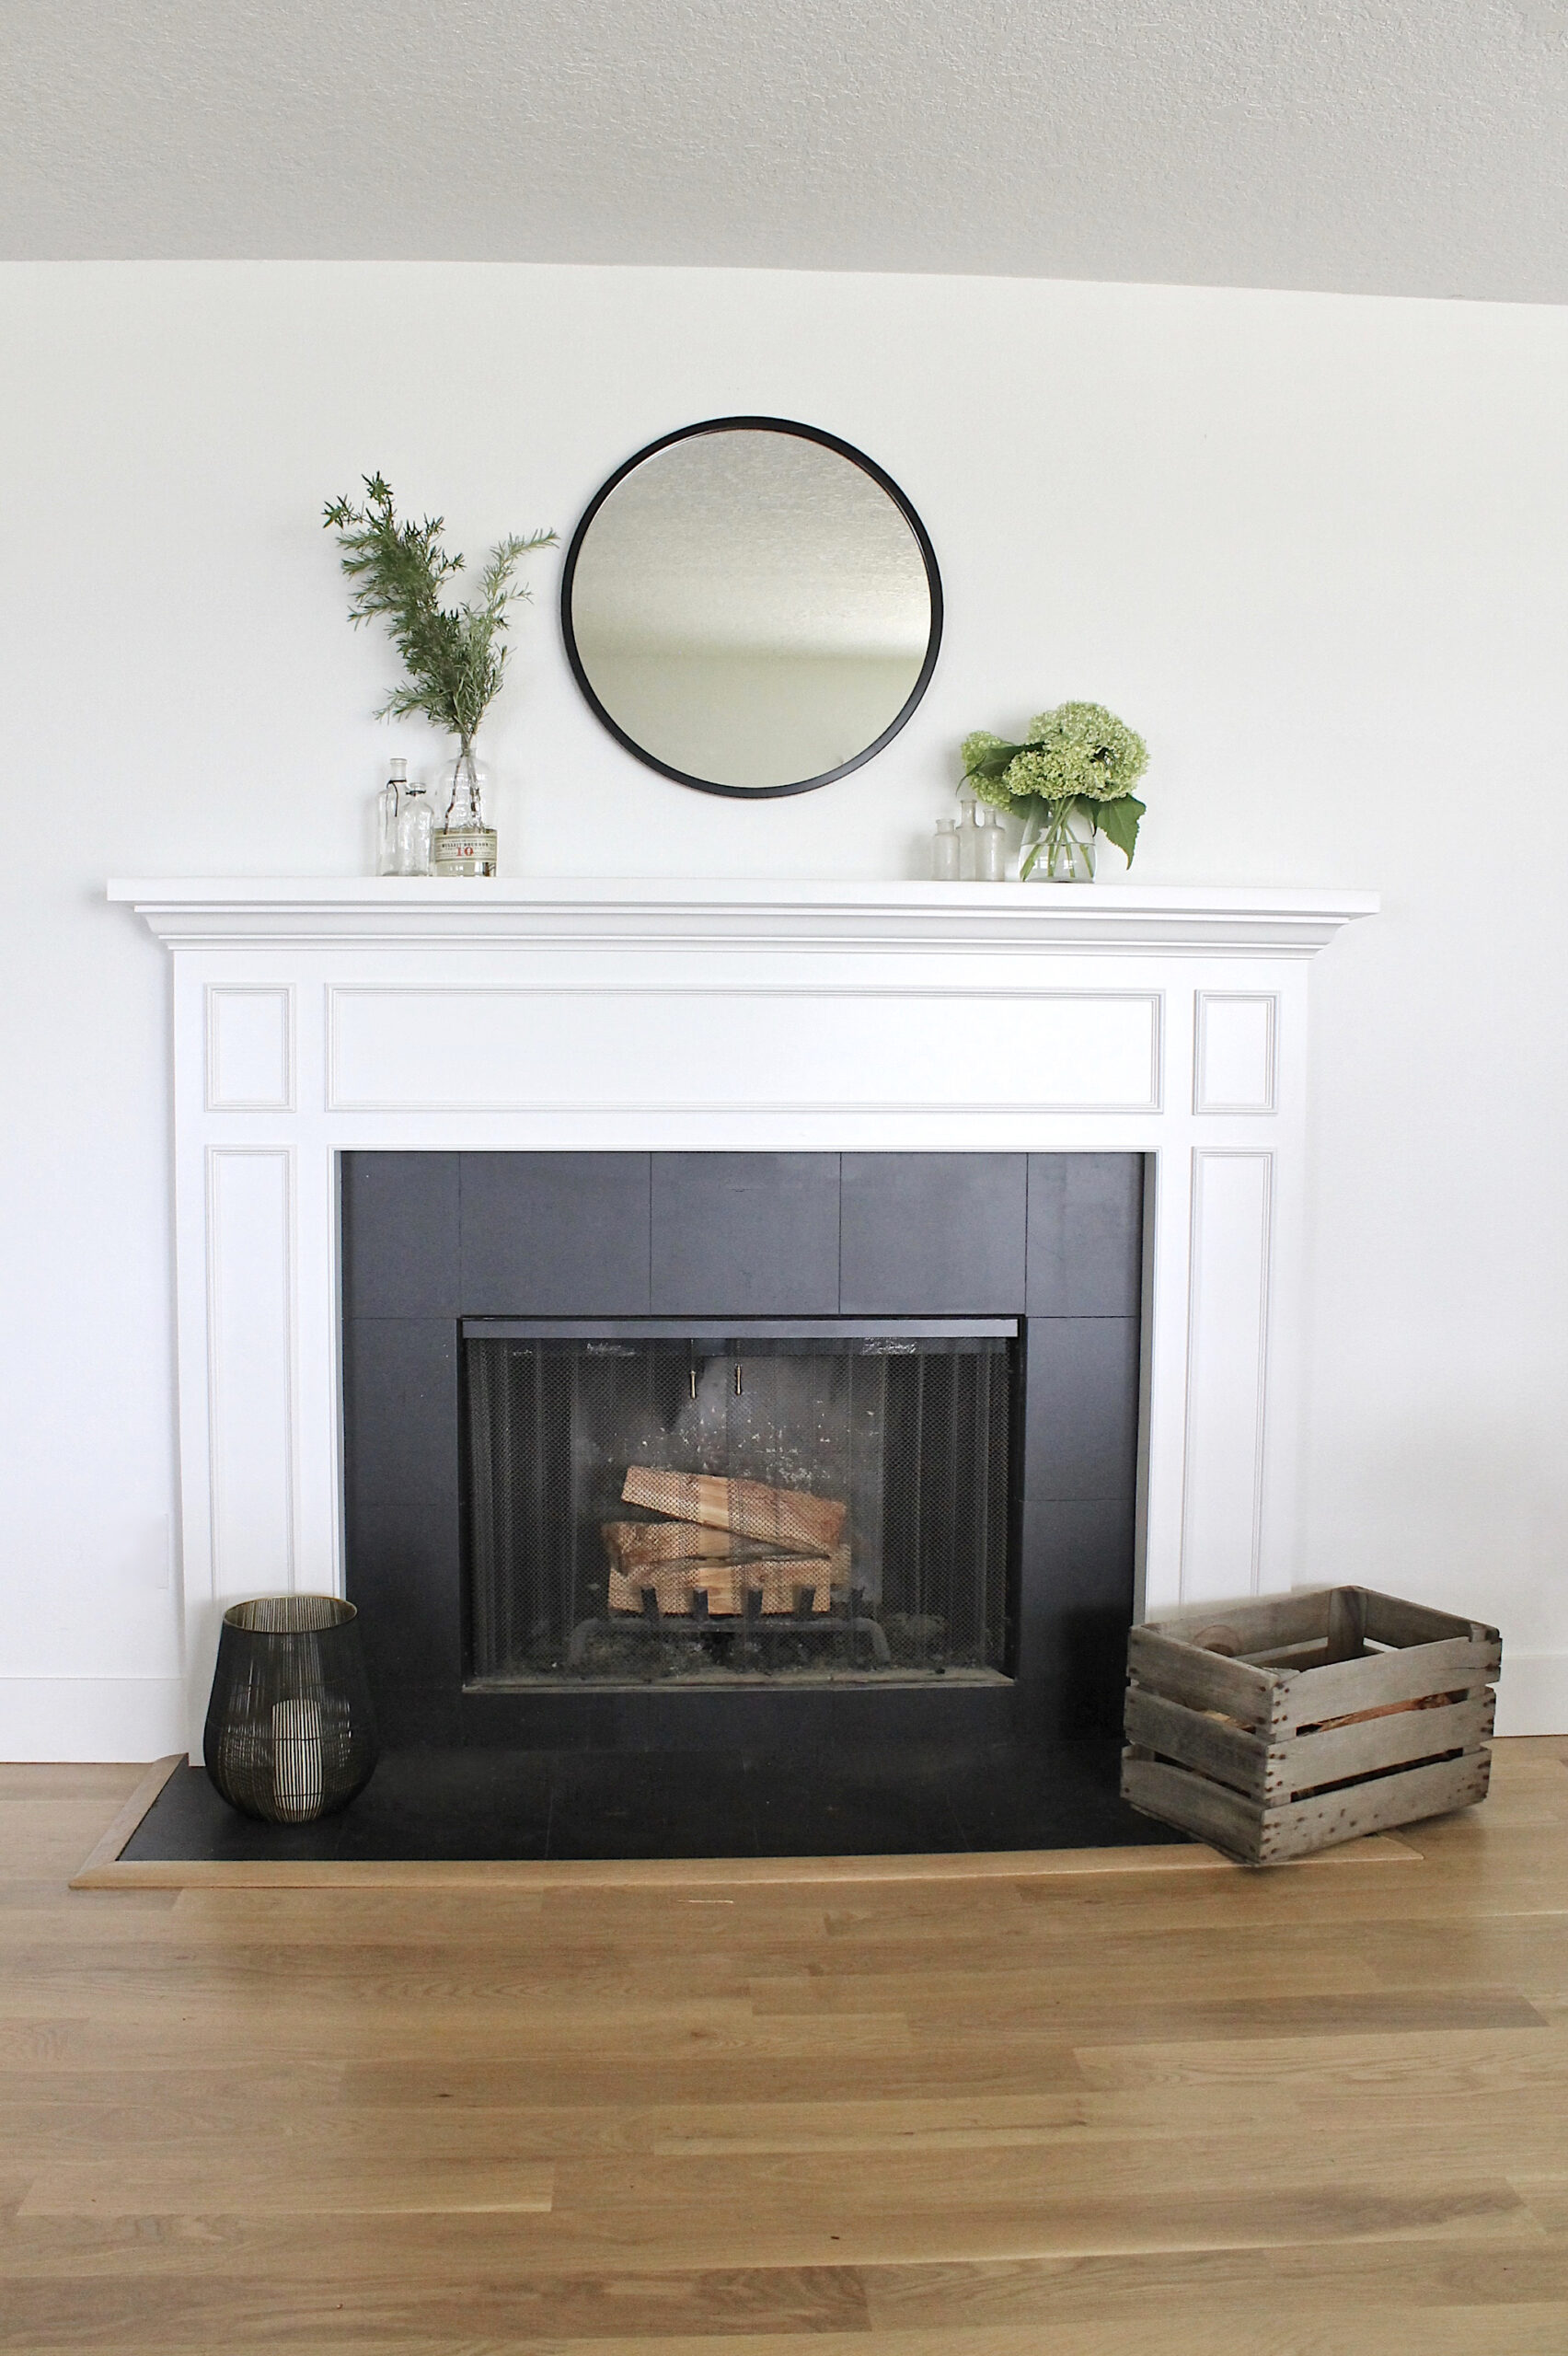 How To Paint A Ceramic Tile Fireplace, Replacing Tile Around Fireplace Floor